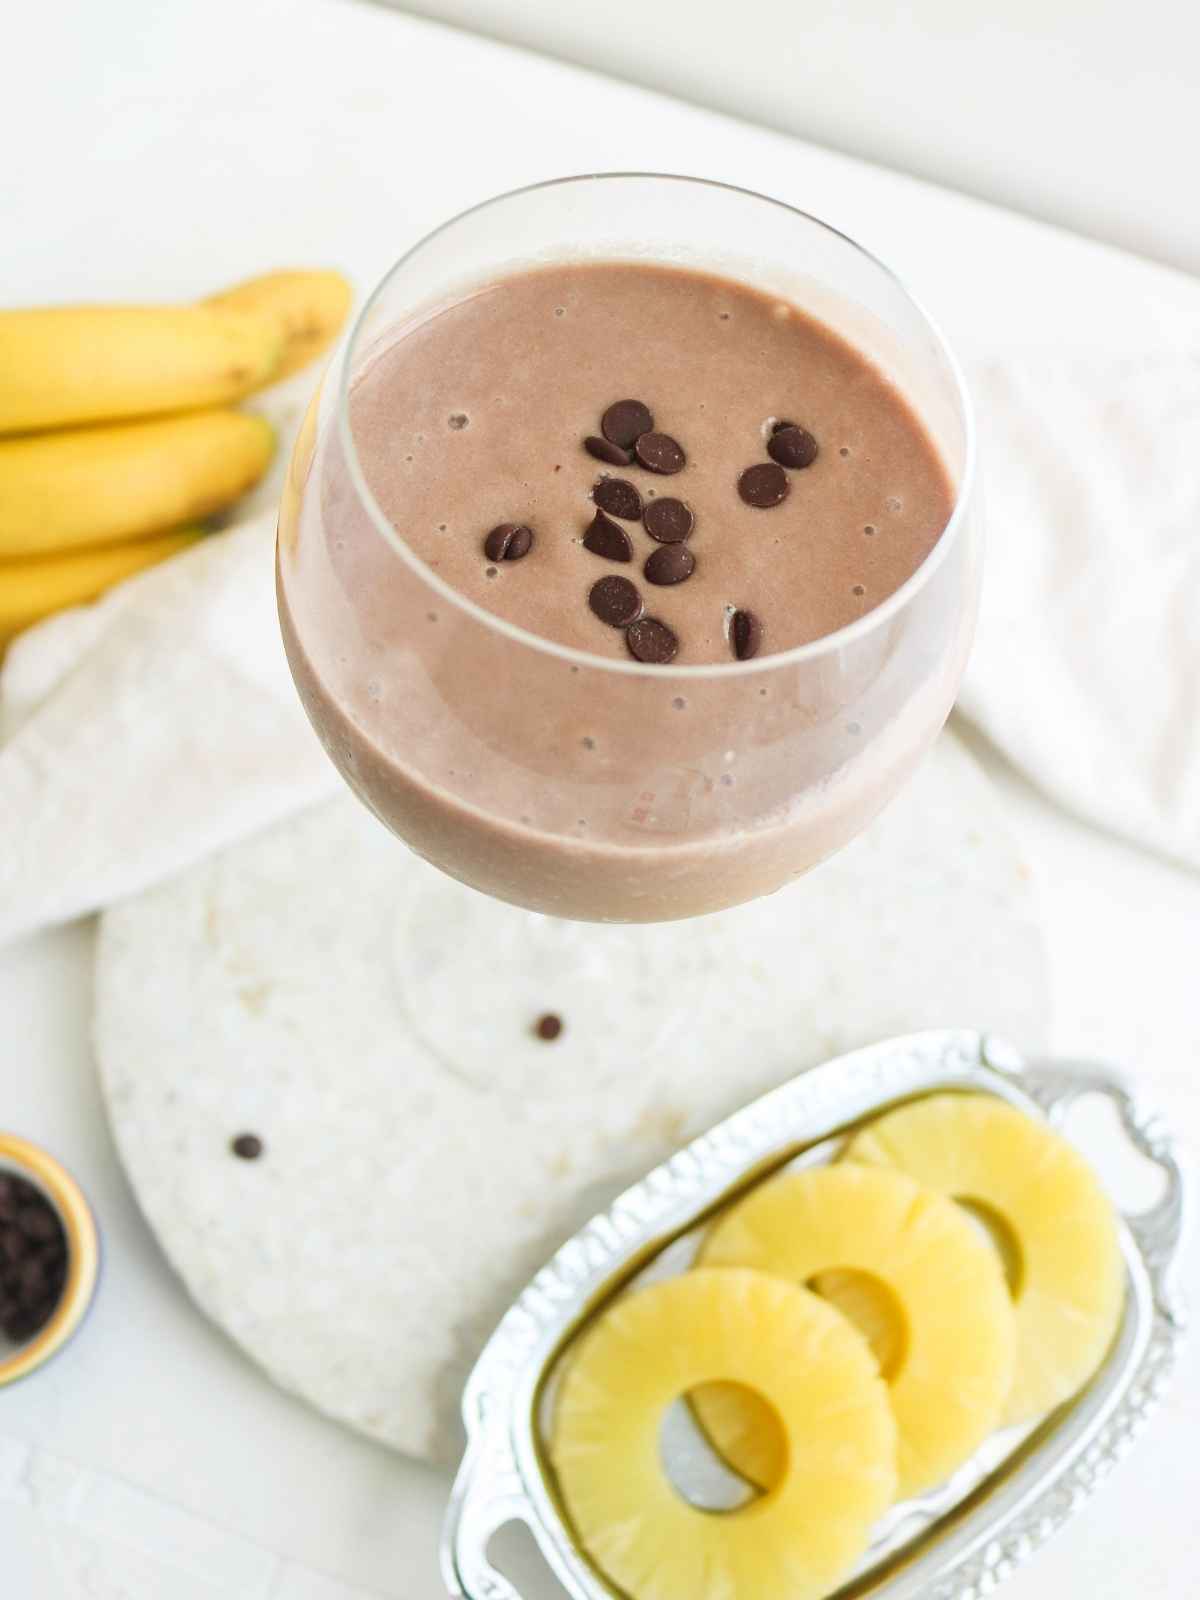  chocolate pineapple smoothie in a glass with pineapple slices on side